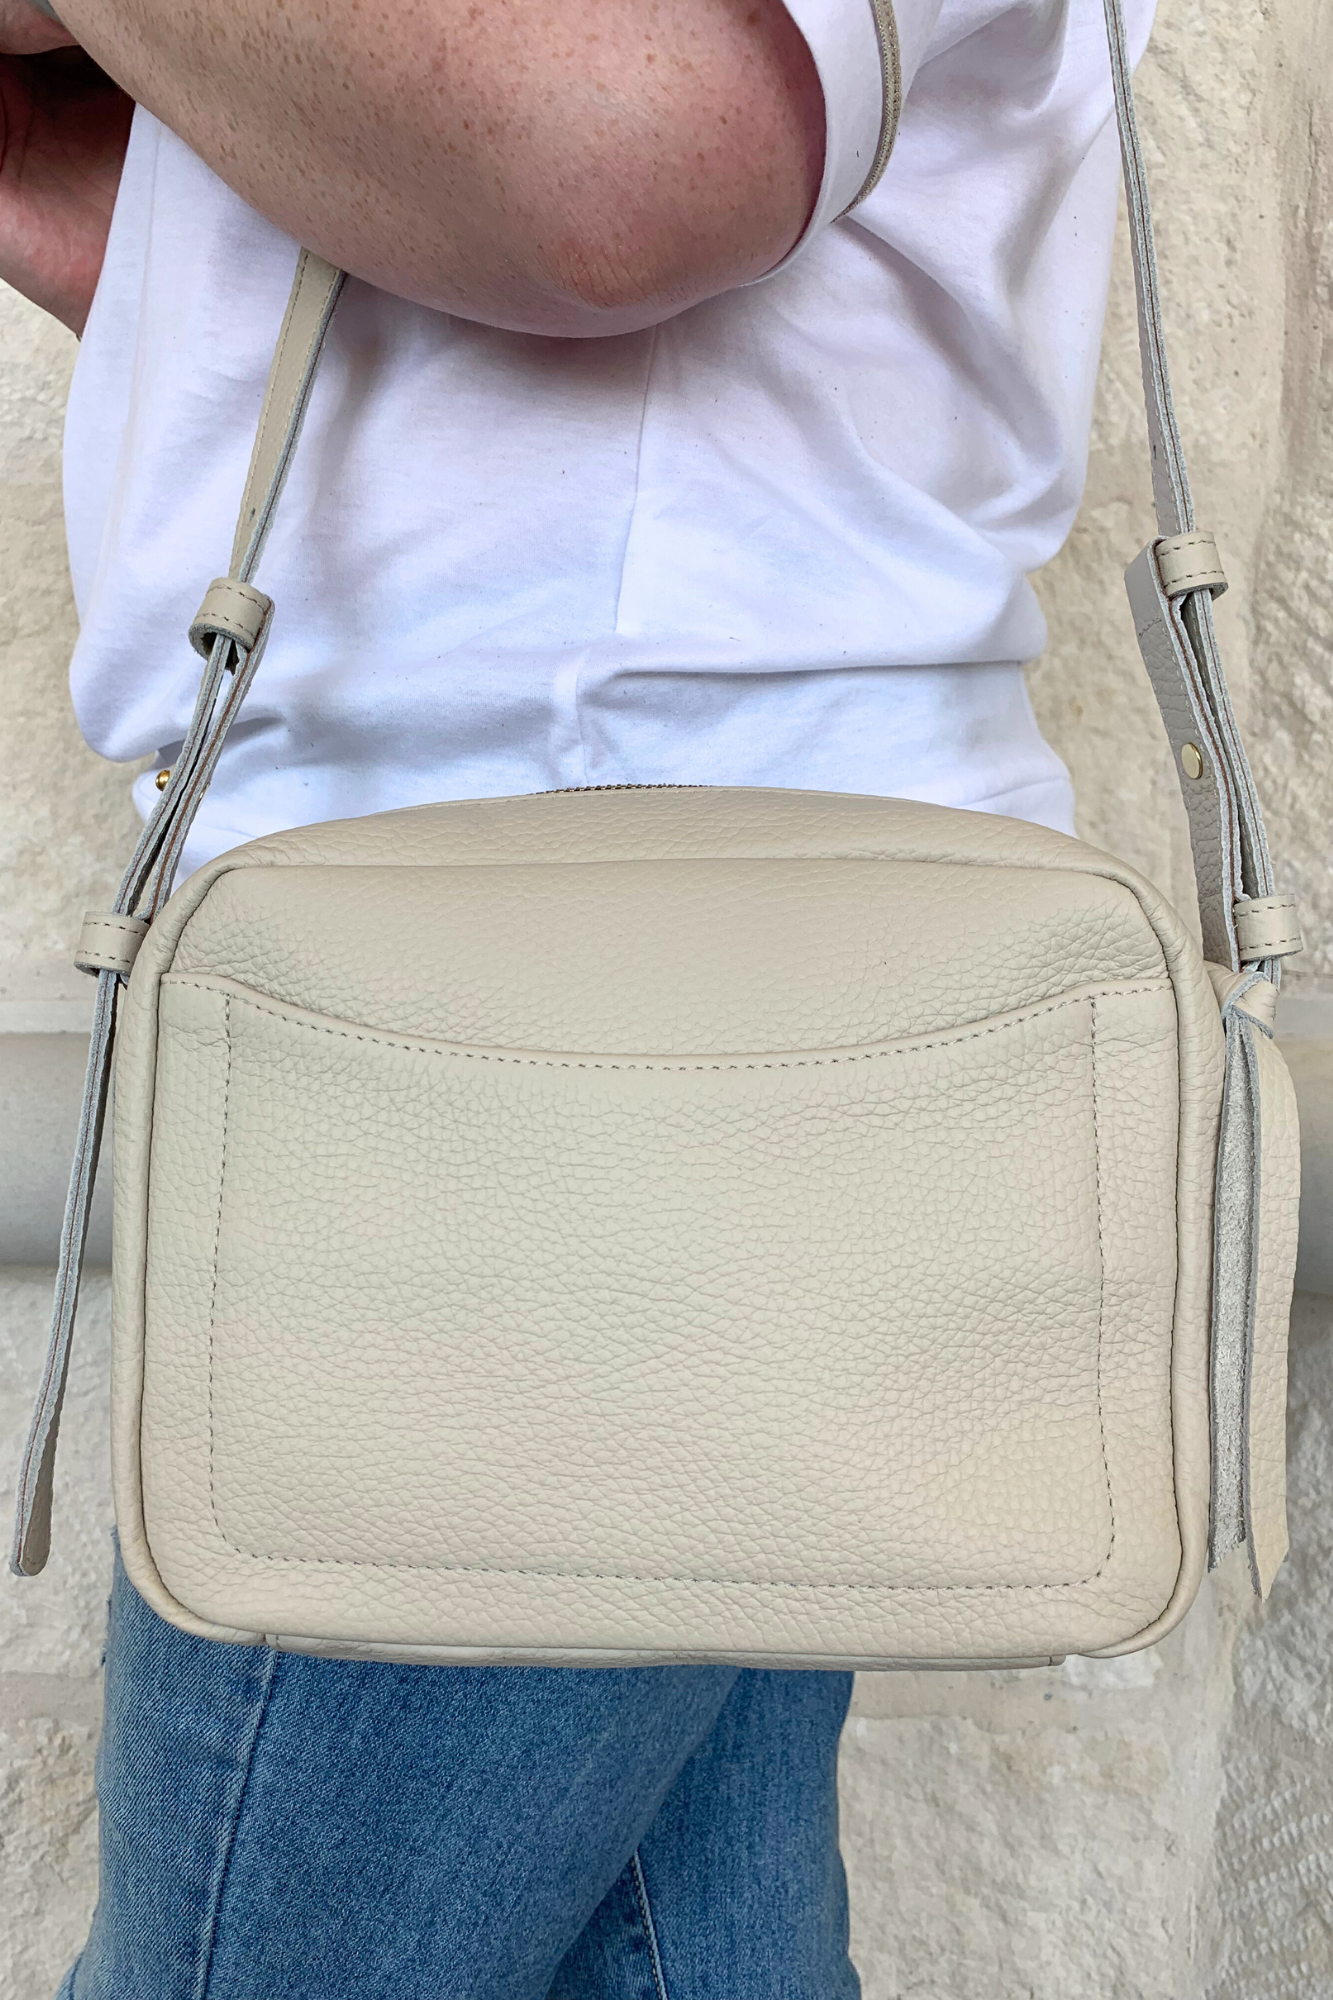 The Allegra Camera Bag from Oliveve is the perfect way to keep your belongings secure. It features compartments and a cross-body strap for on-the-go convenience. Its construction and design makes it a perfect daily handbag.